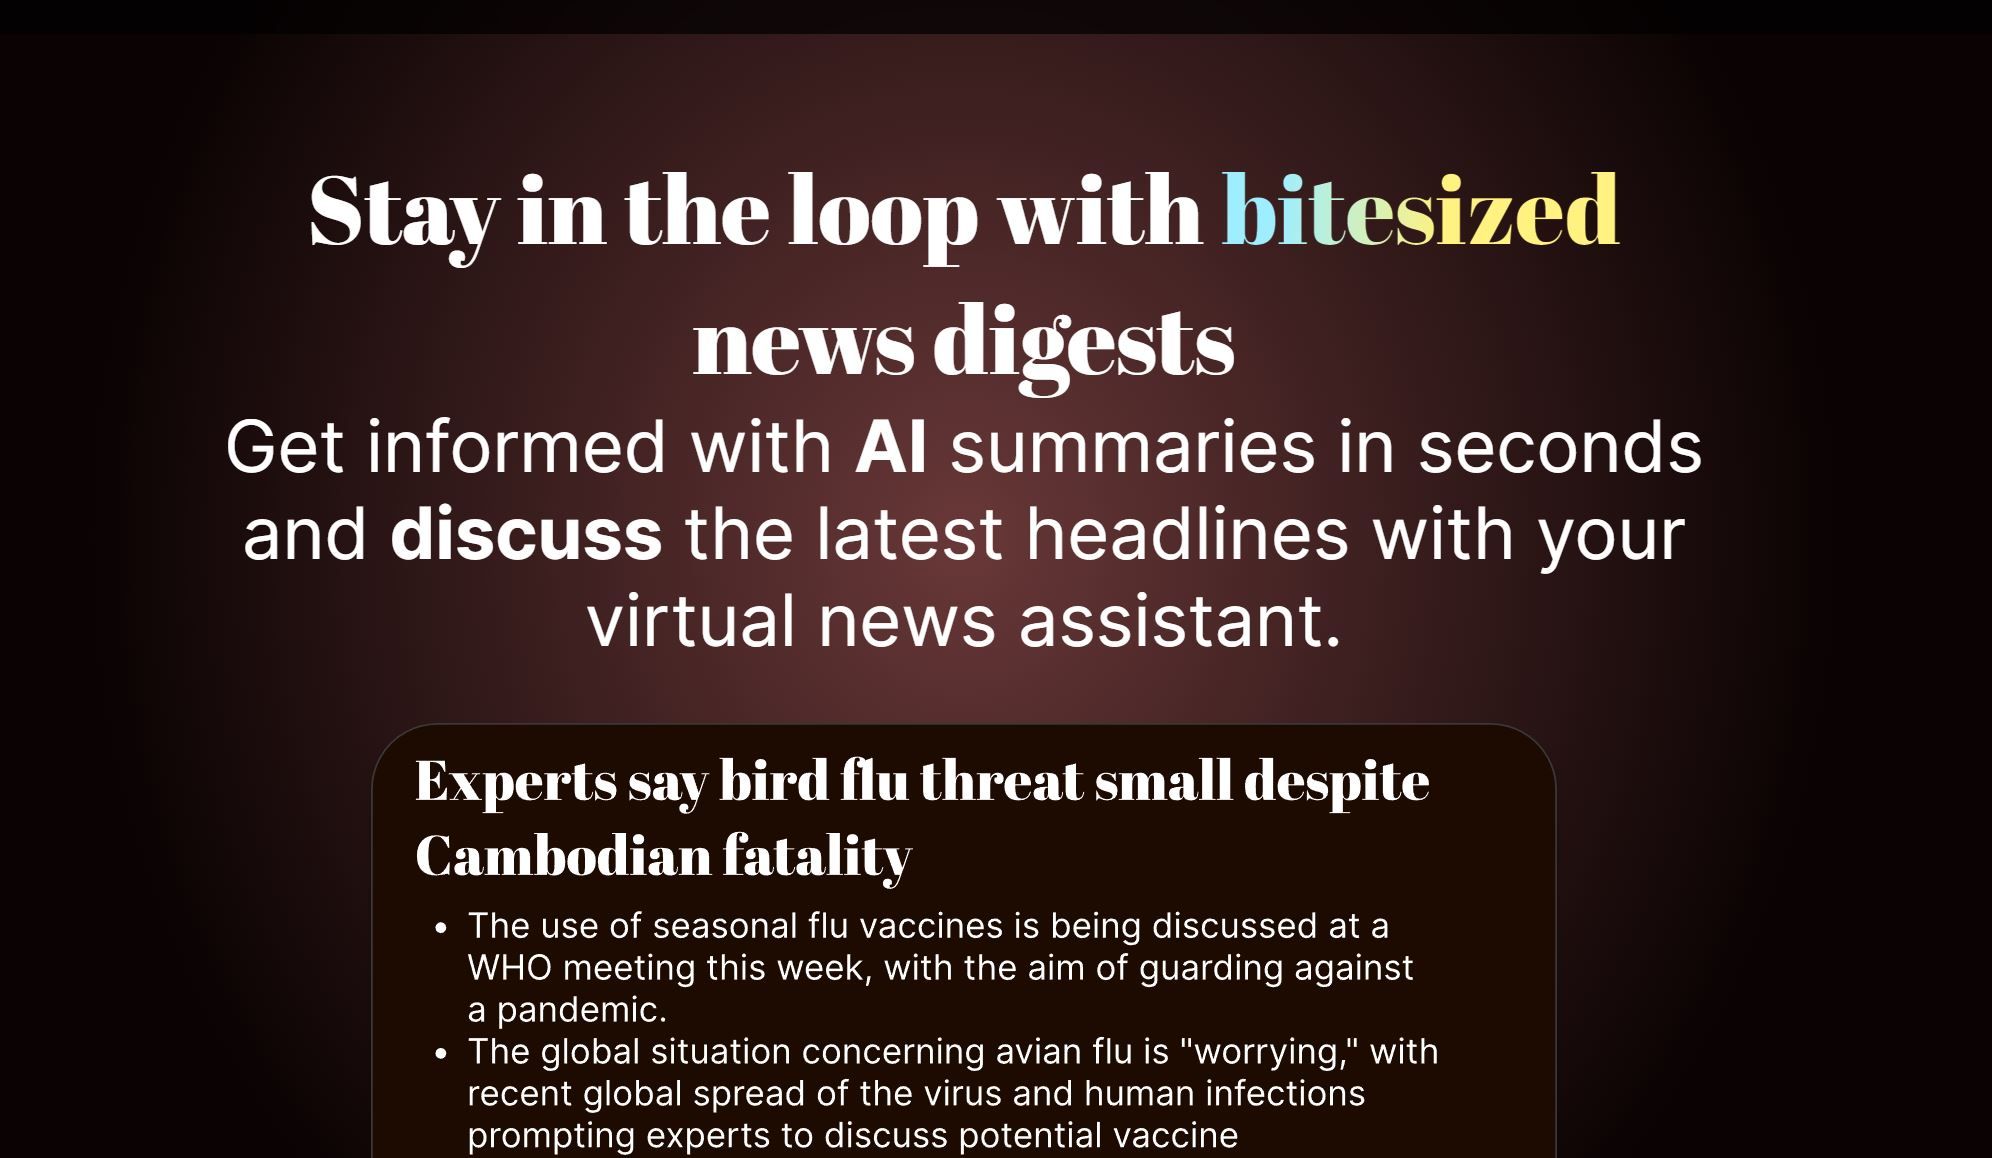  Get Informed with AI News Summaries in Seconds